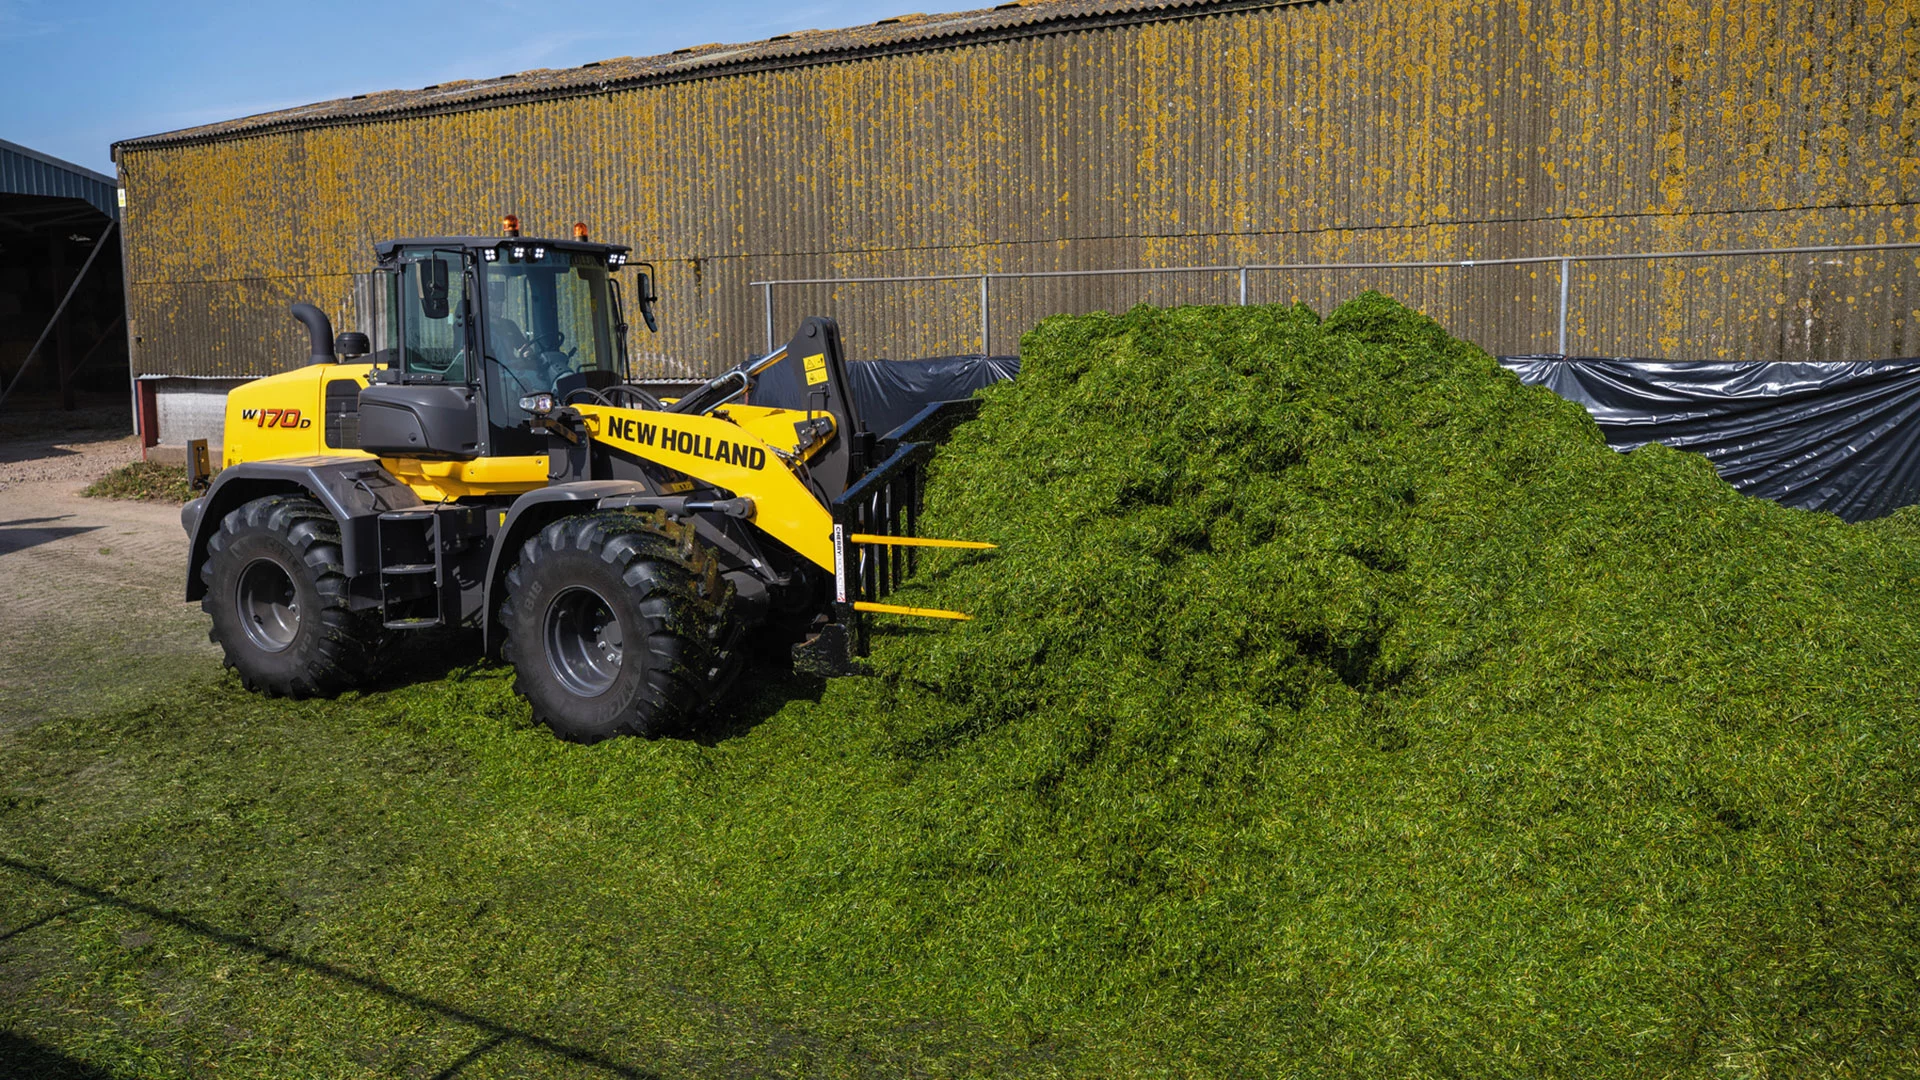 New Holland W170D wheel loader in action with a fork, lifting fresh green silage.